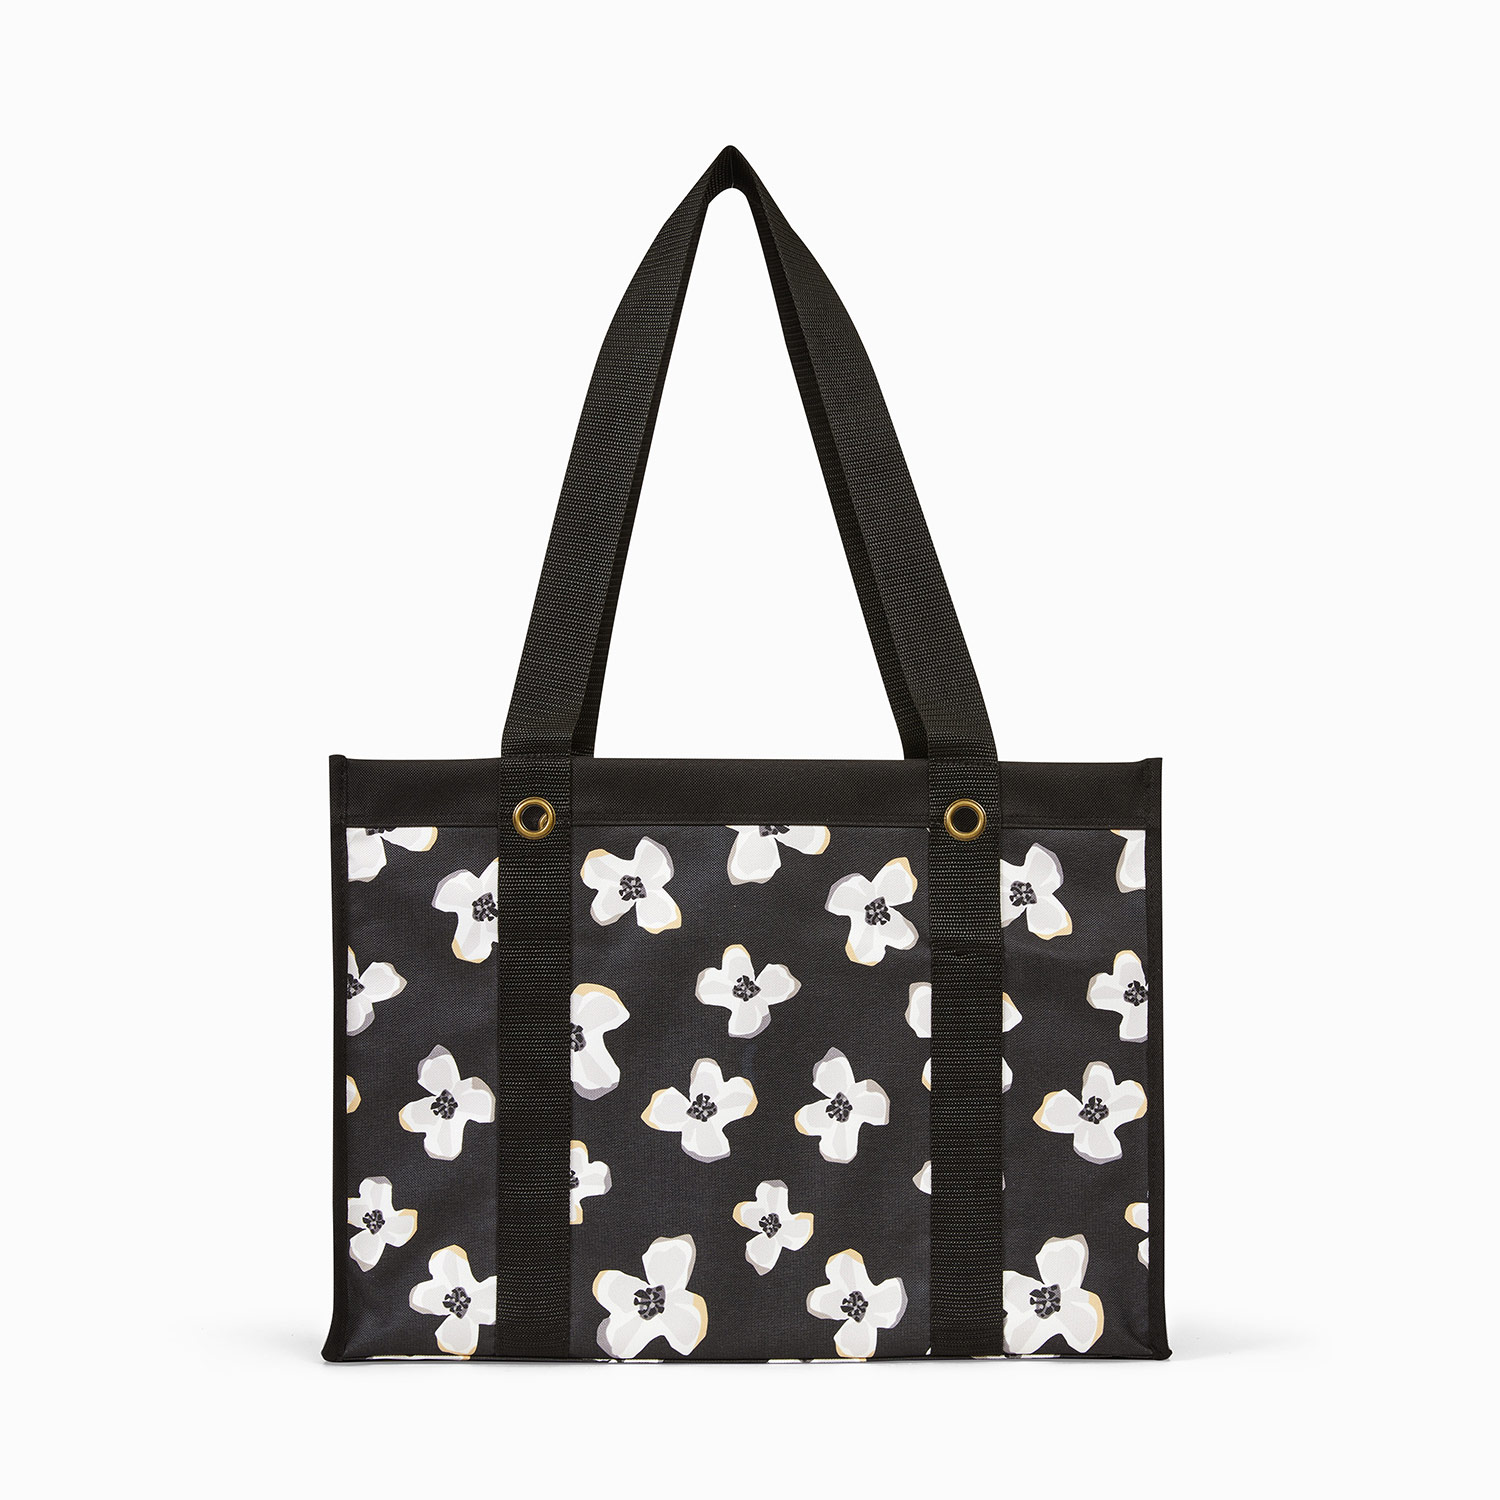 Tote By Thirty One Size: Medium